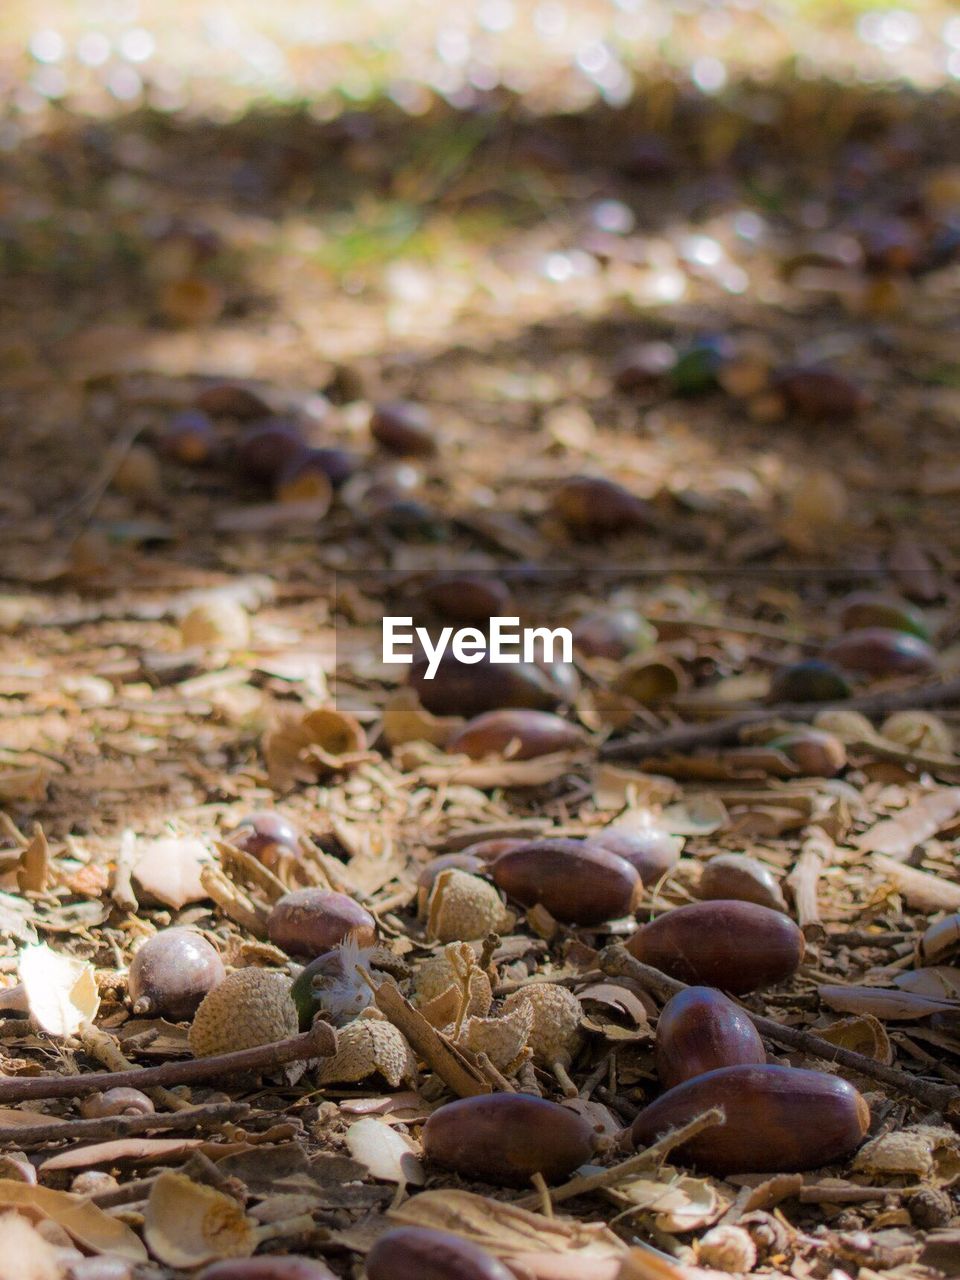 Seed of fruit lying on dirt ground